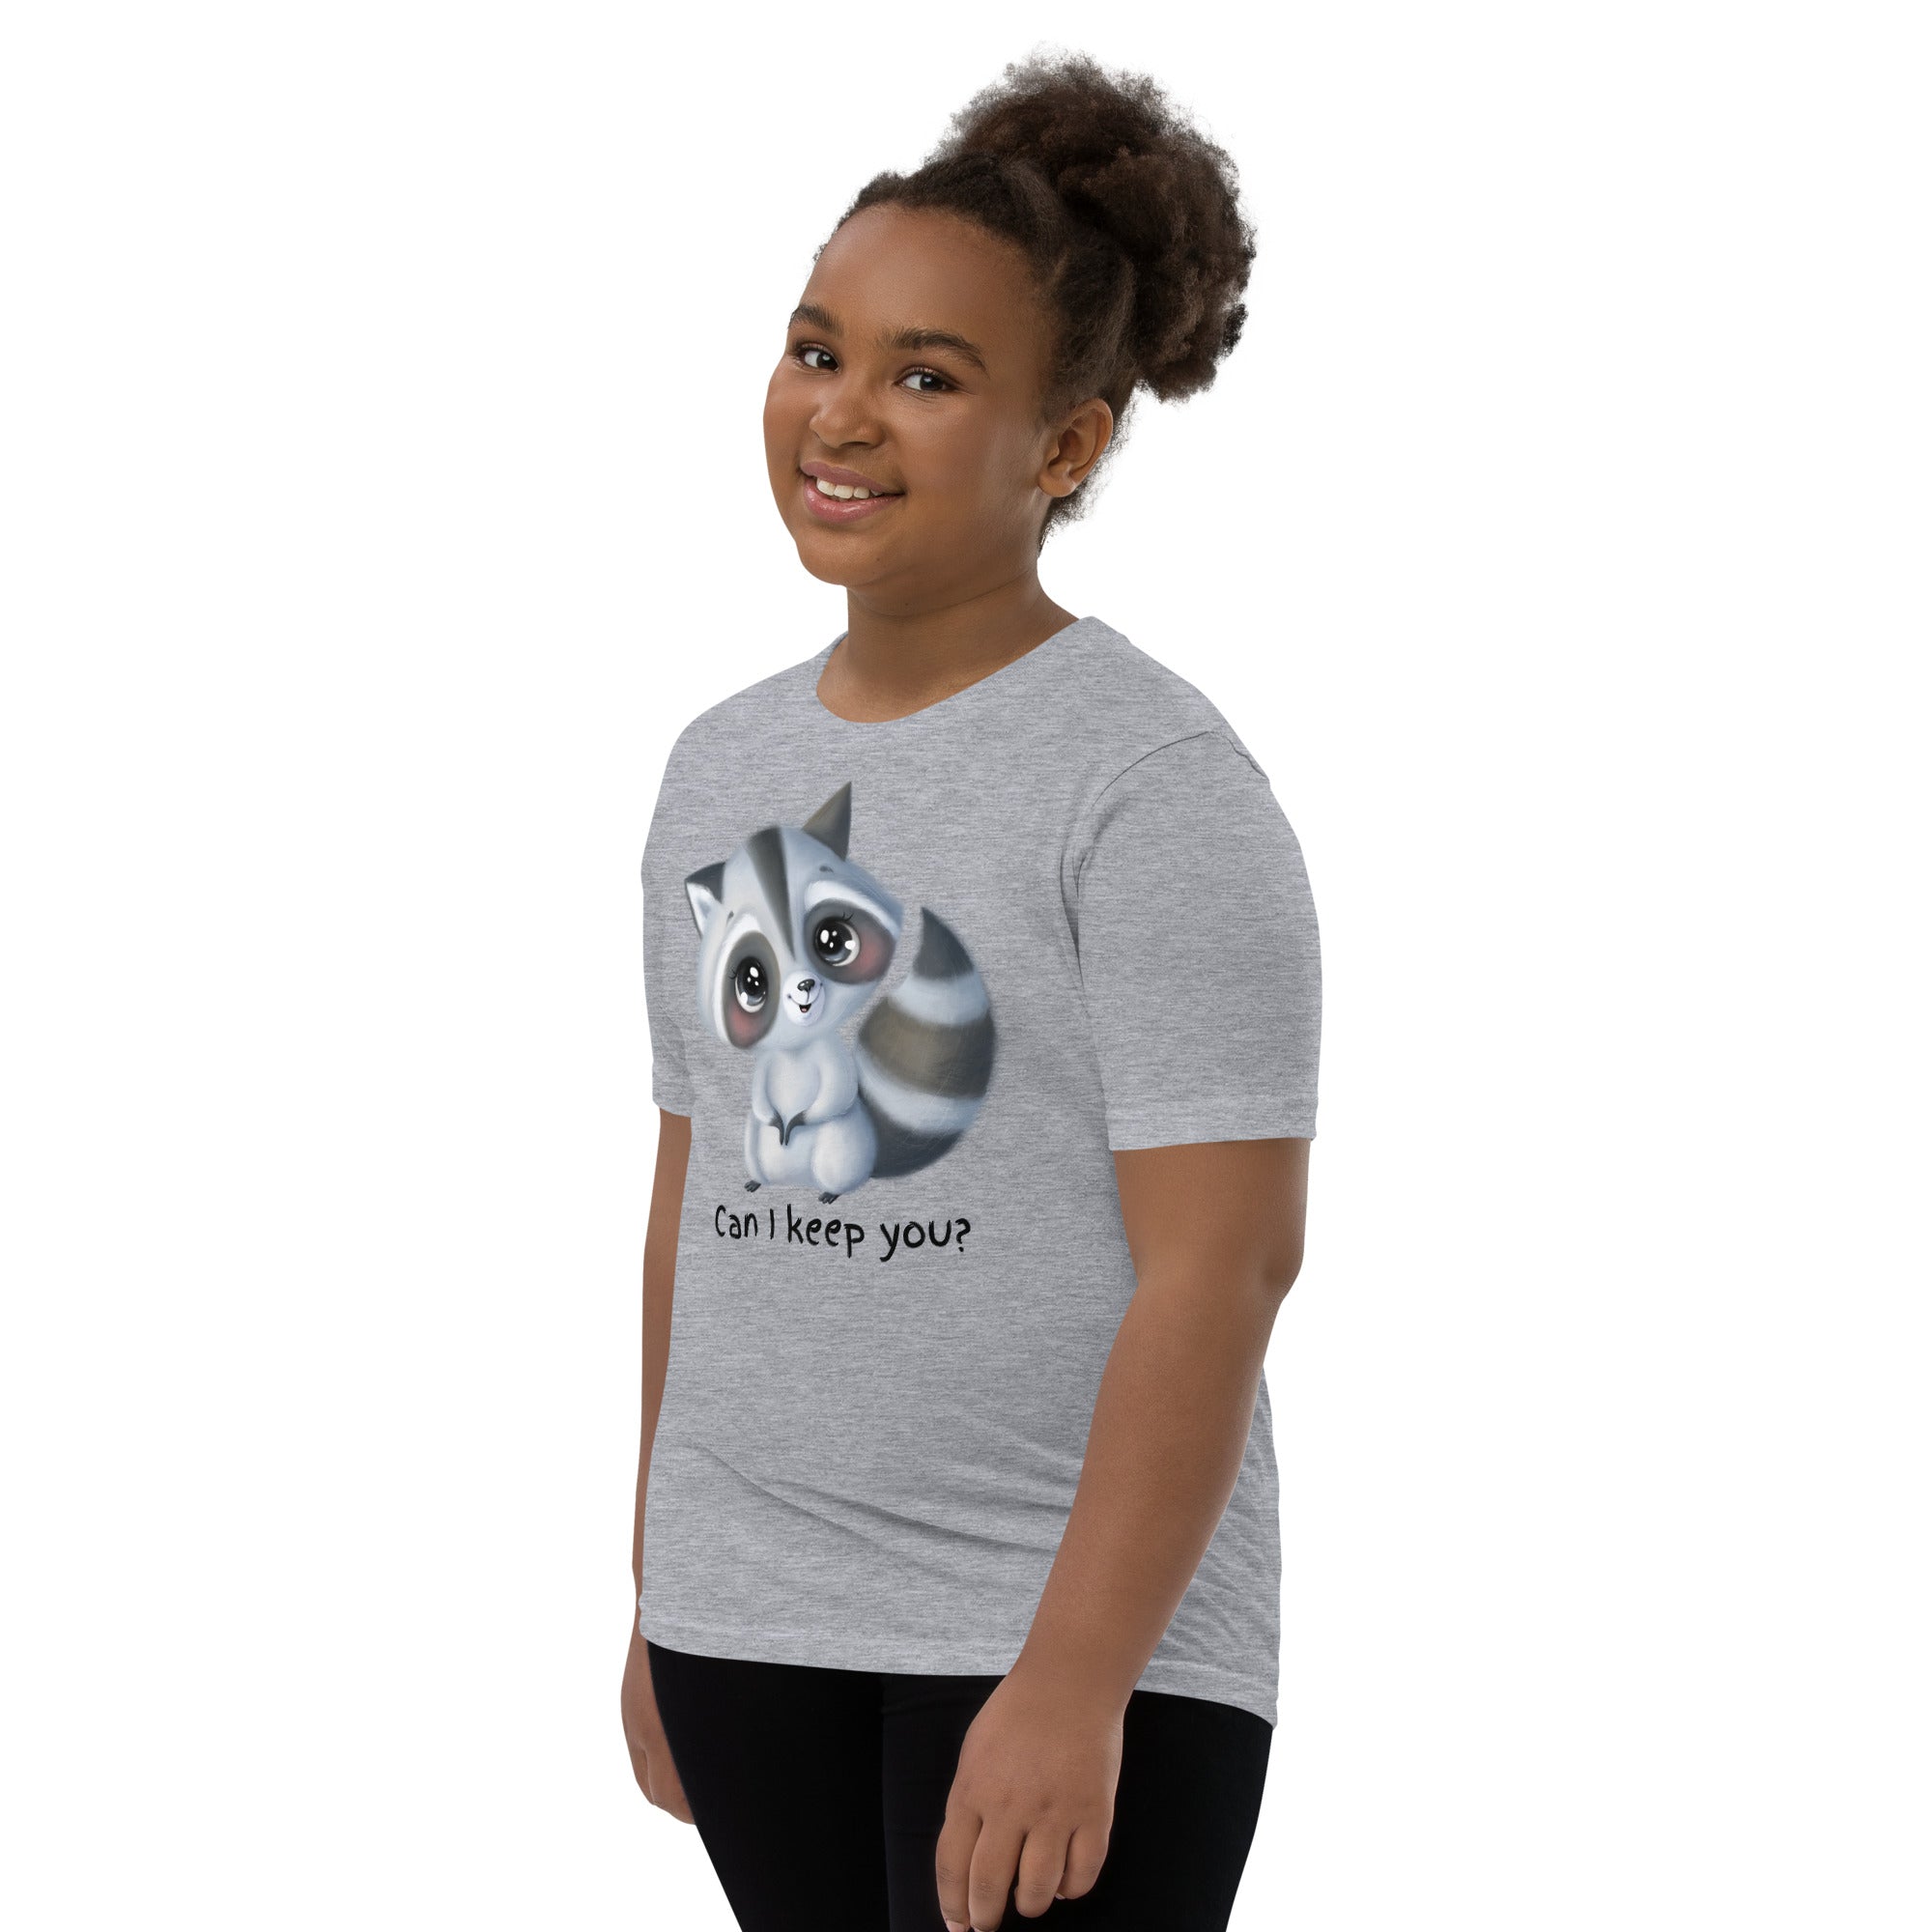 Can I Keep You? - Youth Short Sleeve T-Shirt